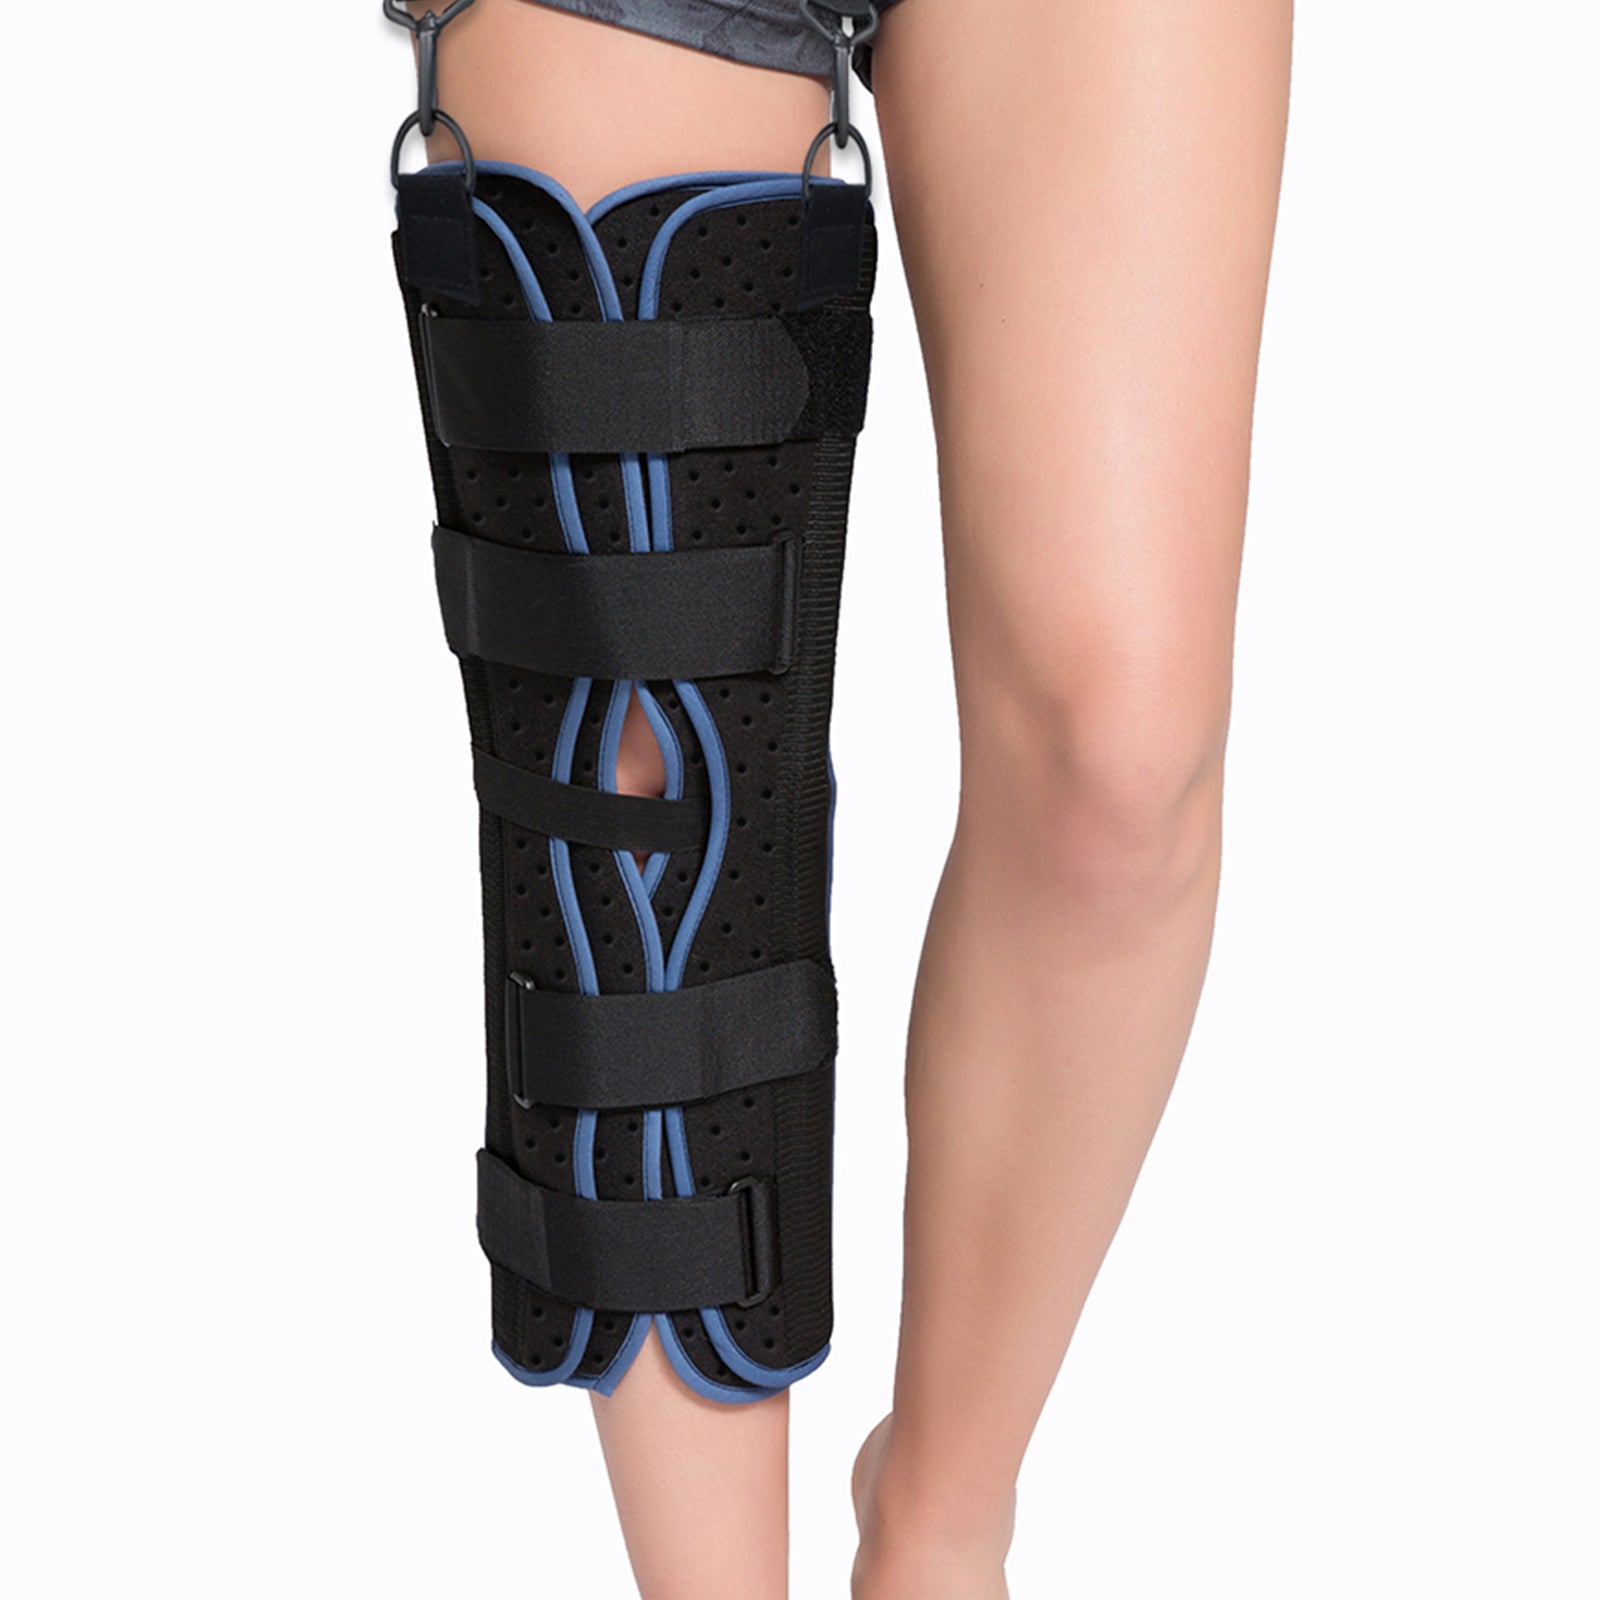 Knee Brace for Knee Pain: Types, Tips, Contraindications